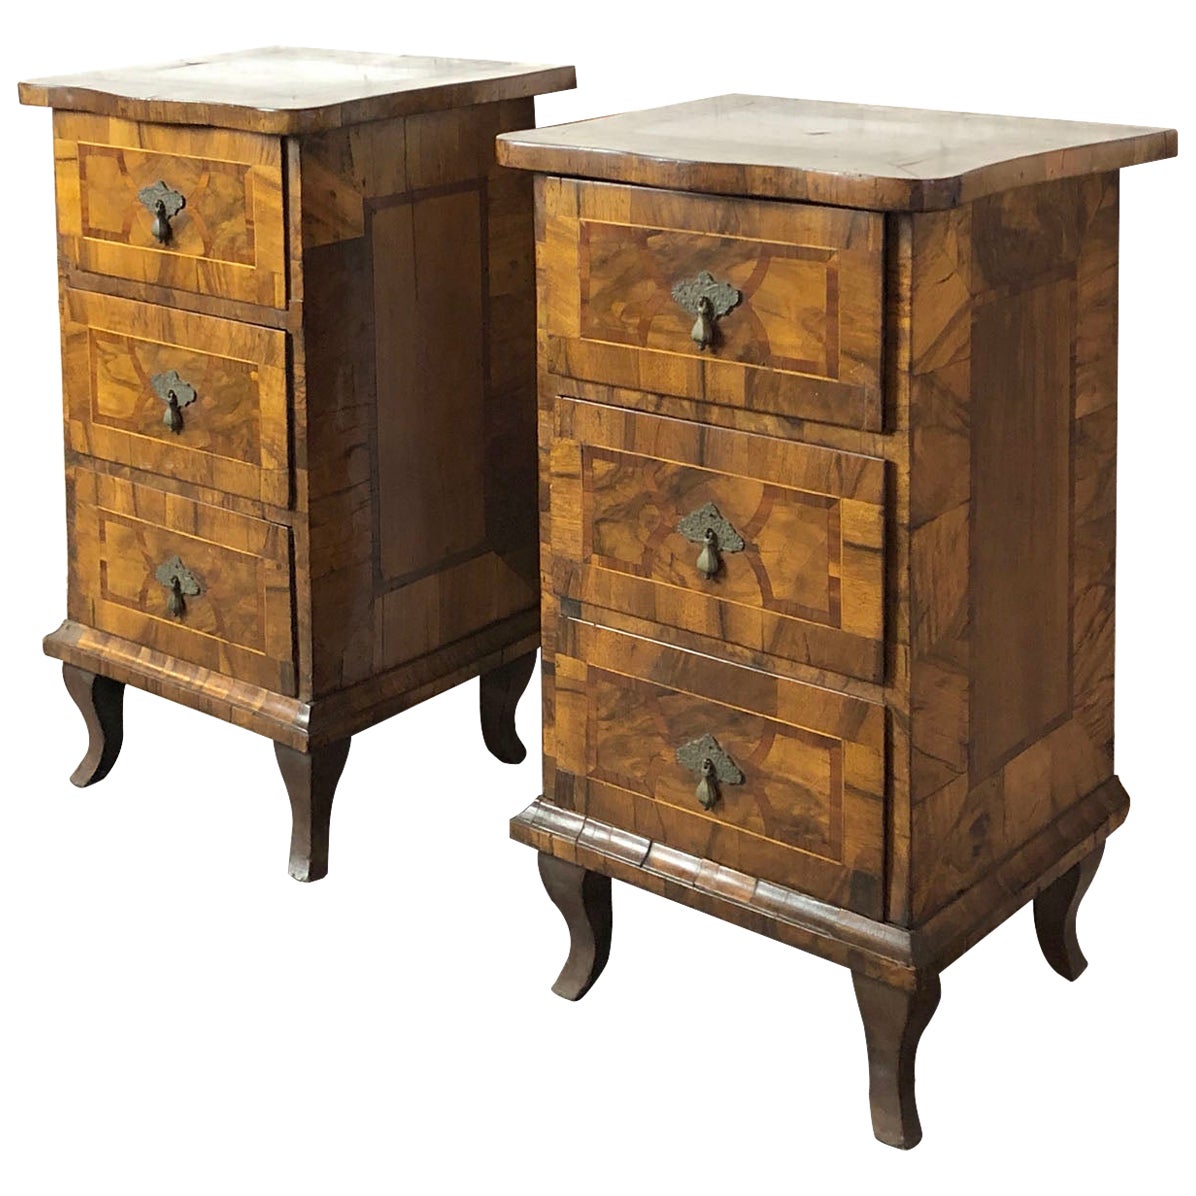 Pair of Italian Neoclassical Late 18th Century Inlaid Comodini or Night Stands